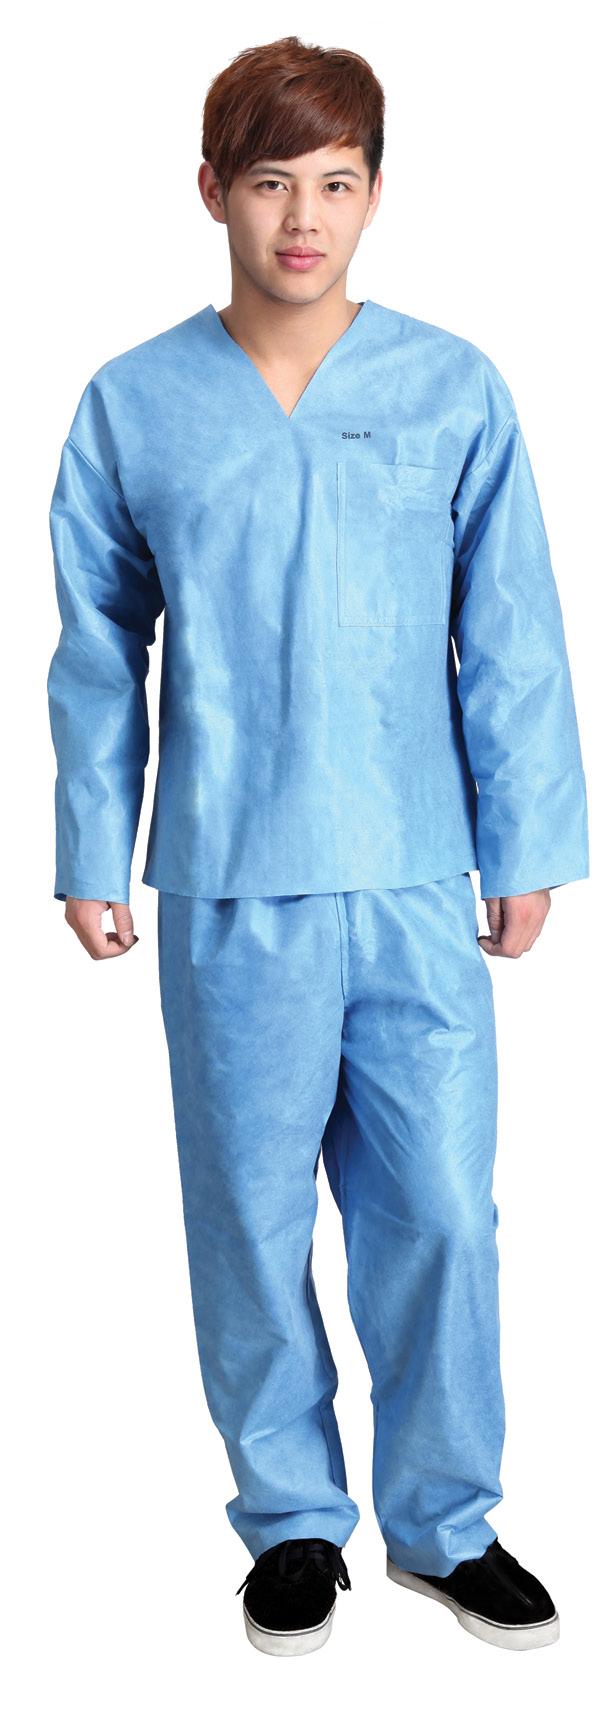 CS2000. Sizes: M 6XL Sold in cases of 30 OREX Modesty Garments The ultimate in single-use modesty garments or scrubs!